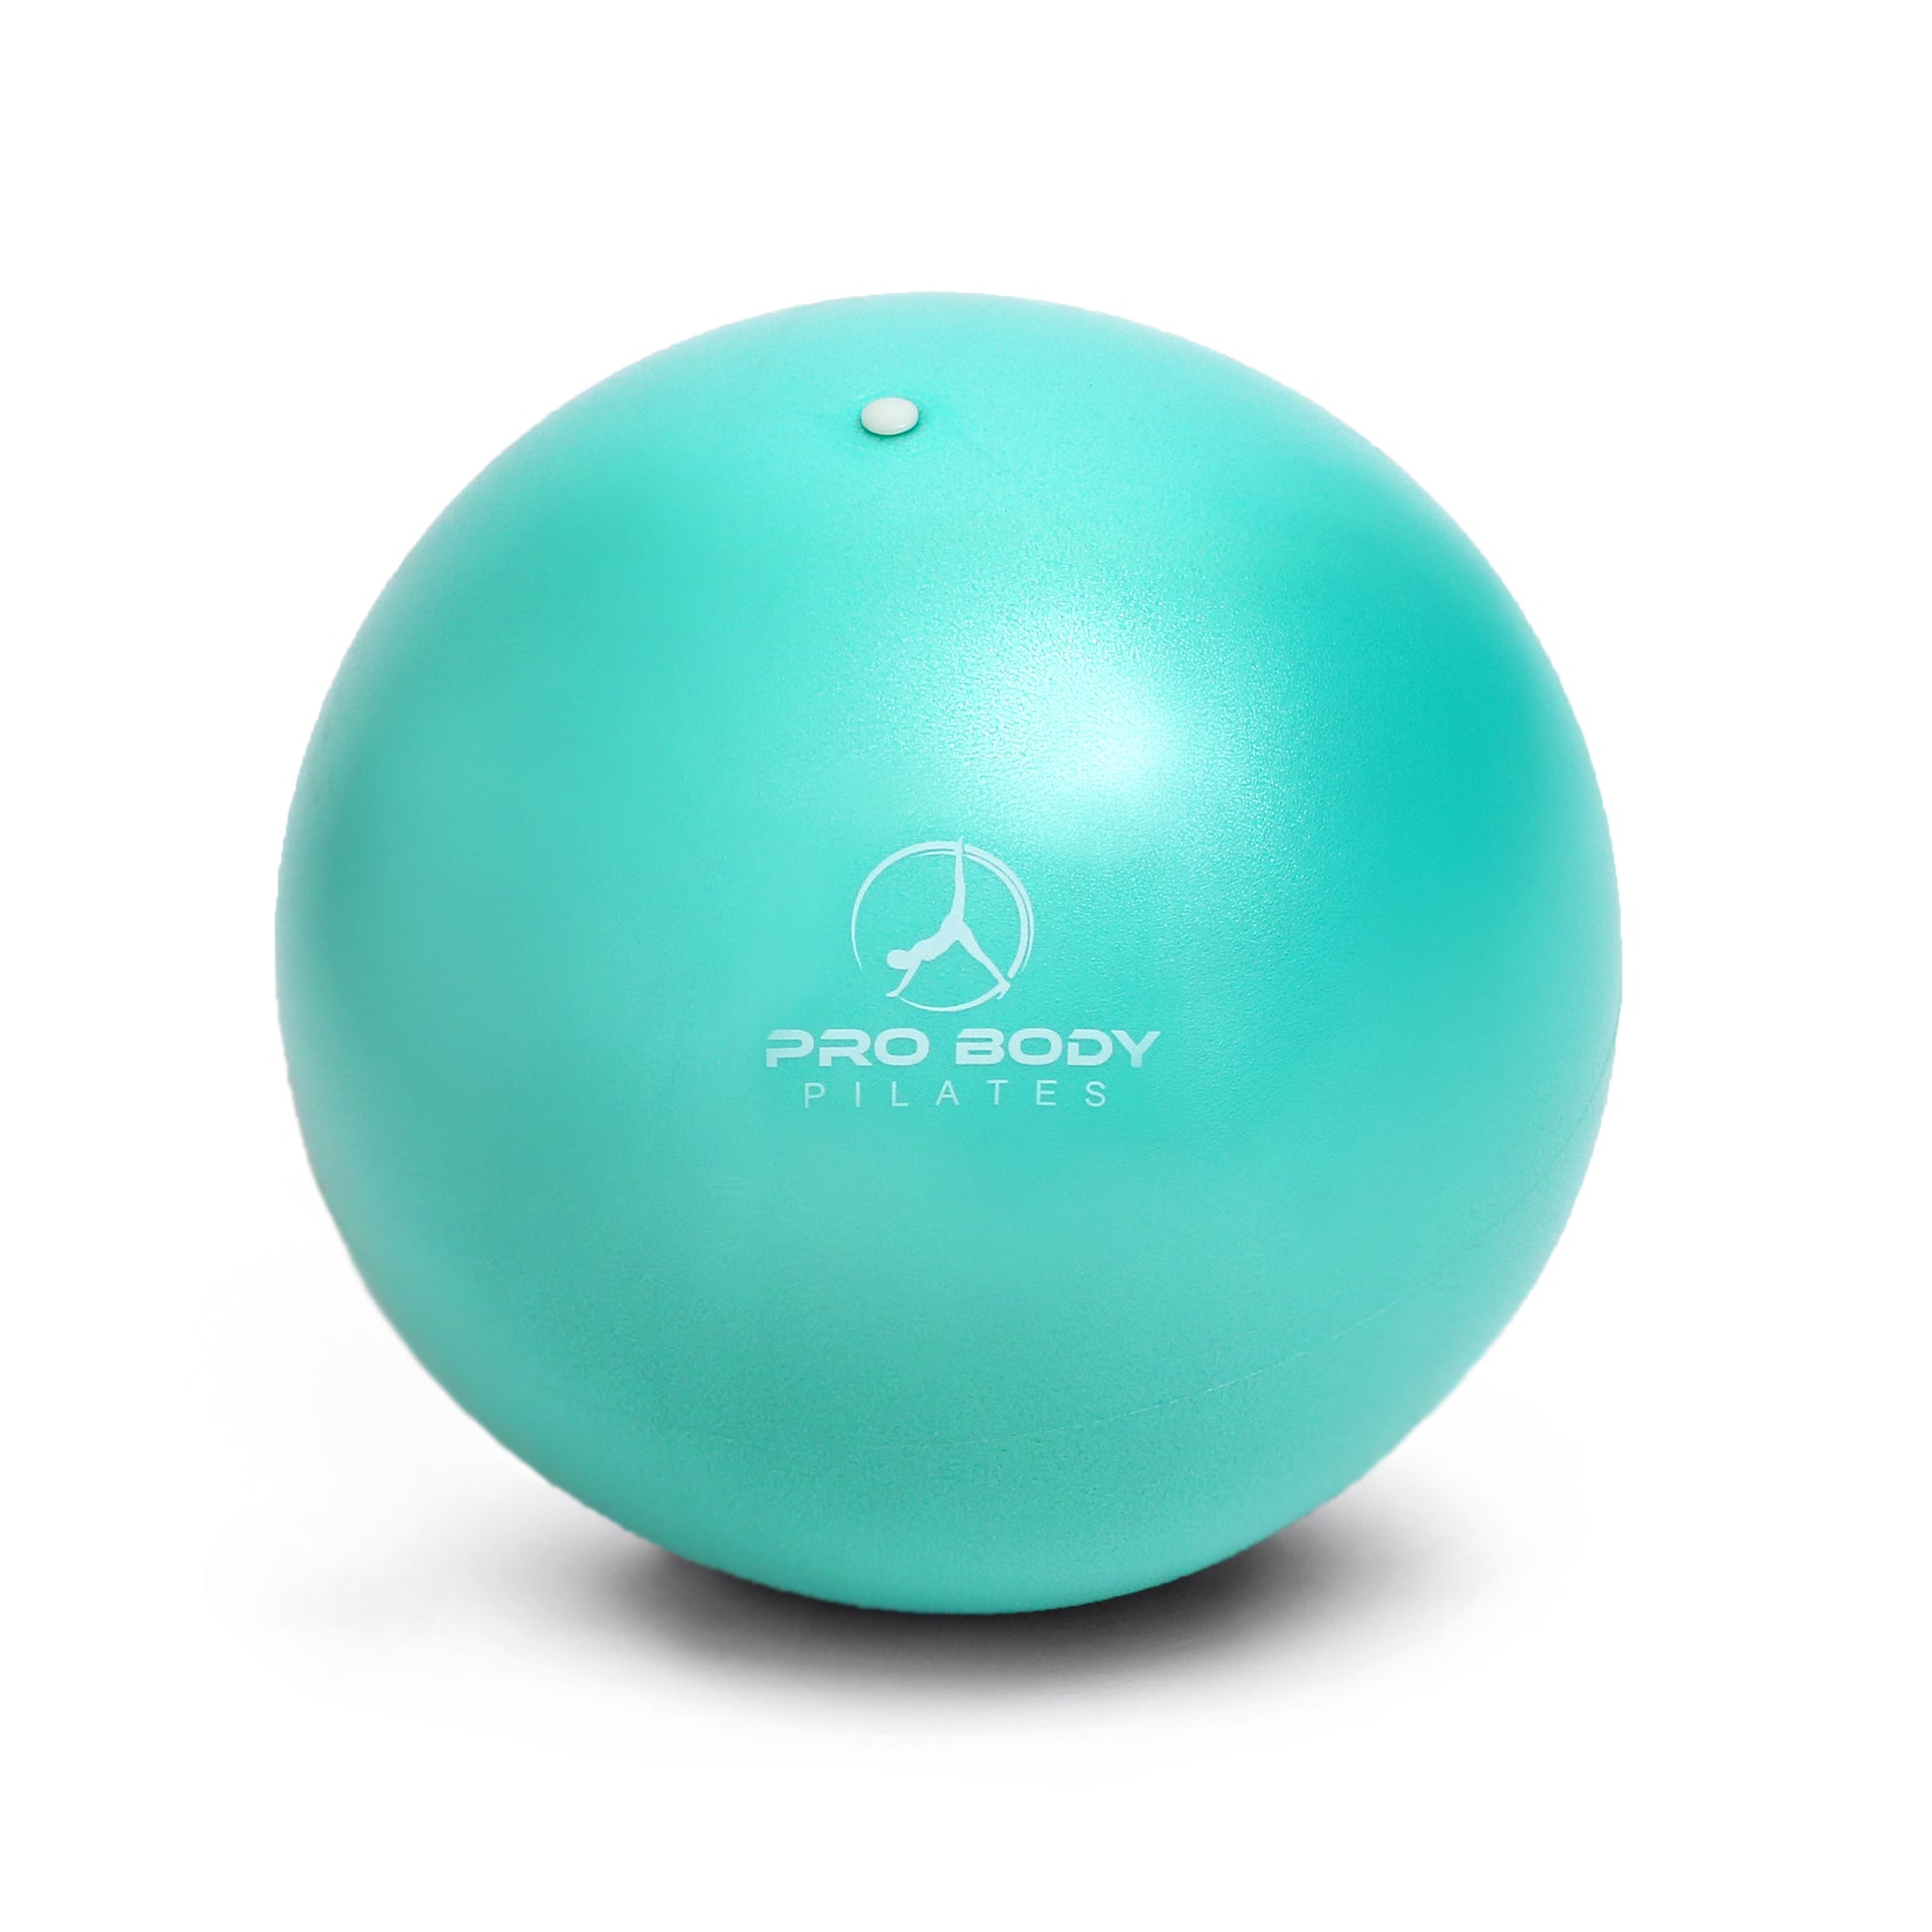 Trideer 9 Inch Pilates Ball Between Knees for Physical Therapy, Mini E –  Hyland Sports Medicine